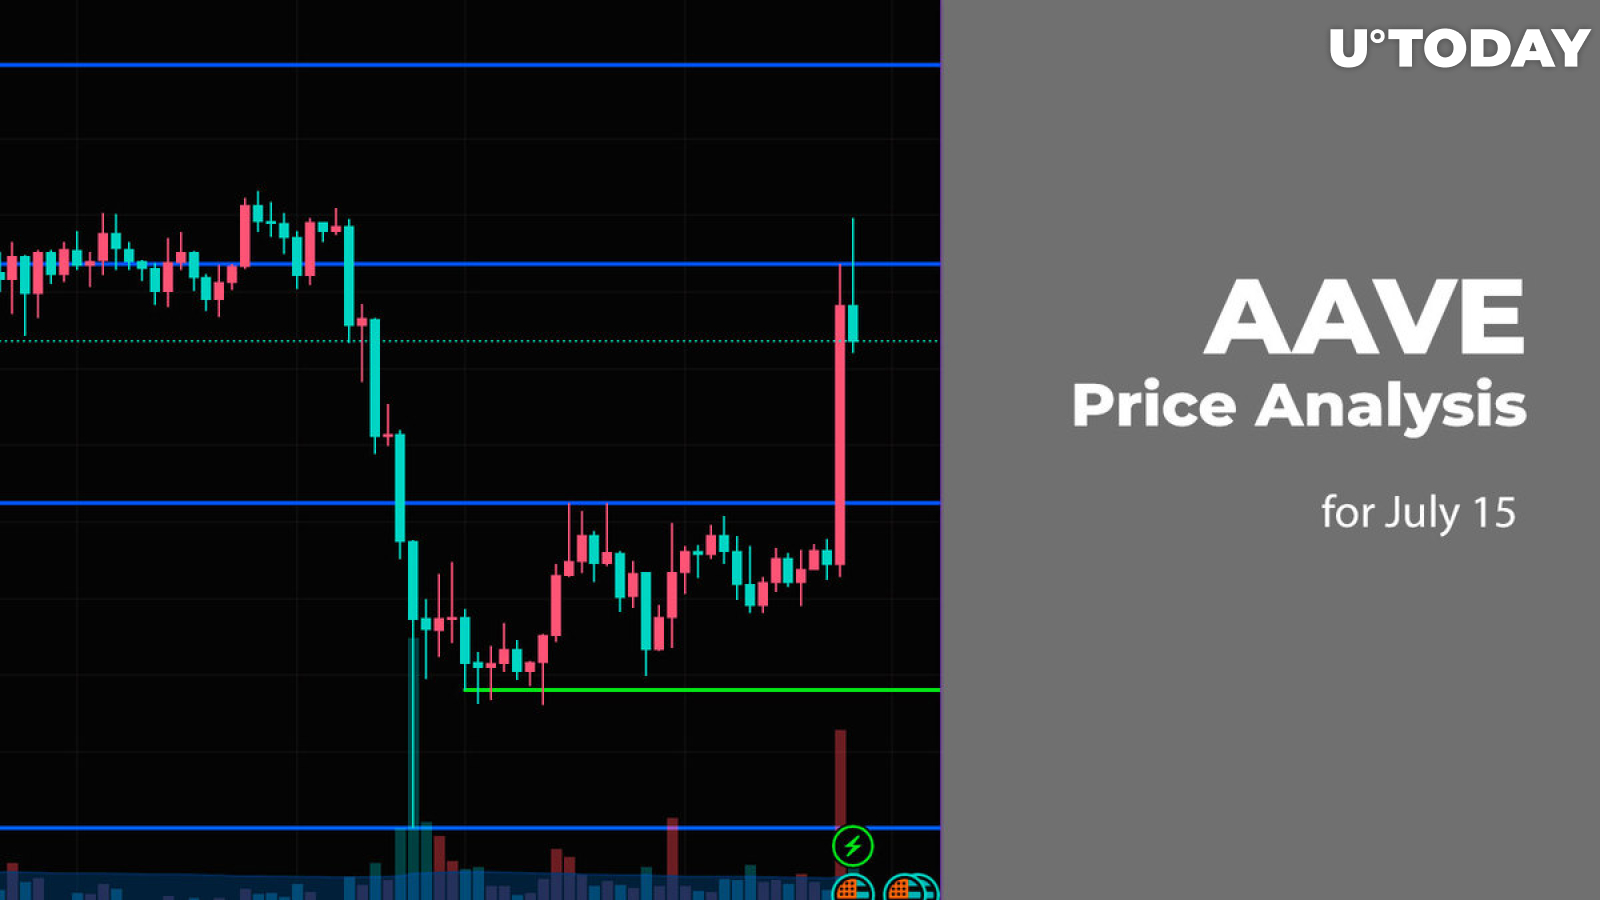 AAVE Price Analysis for July 15